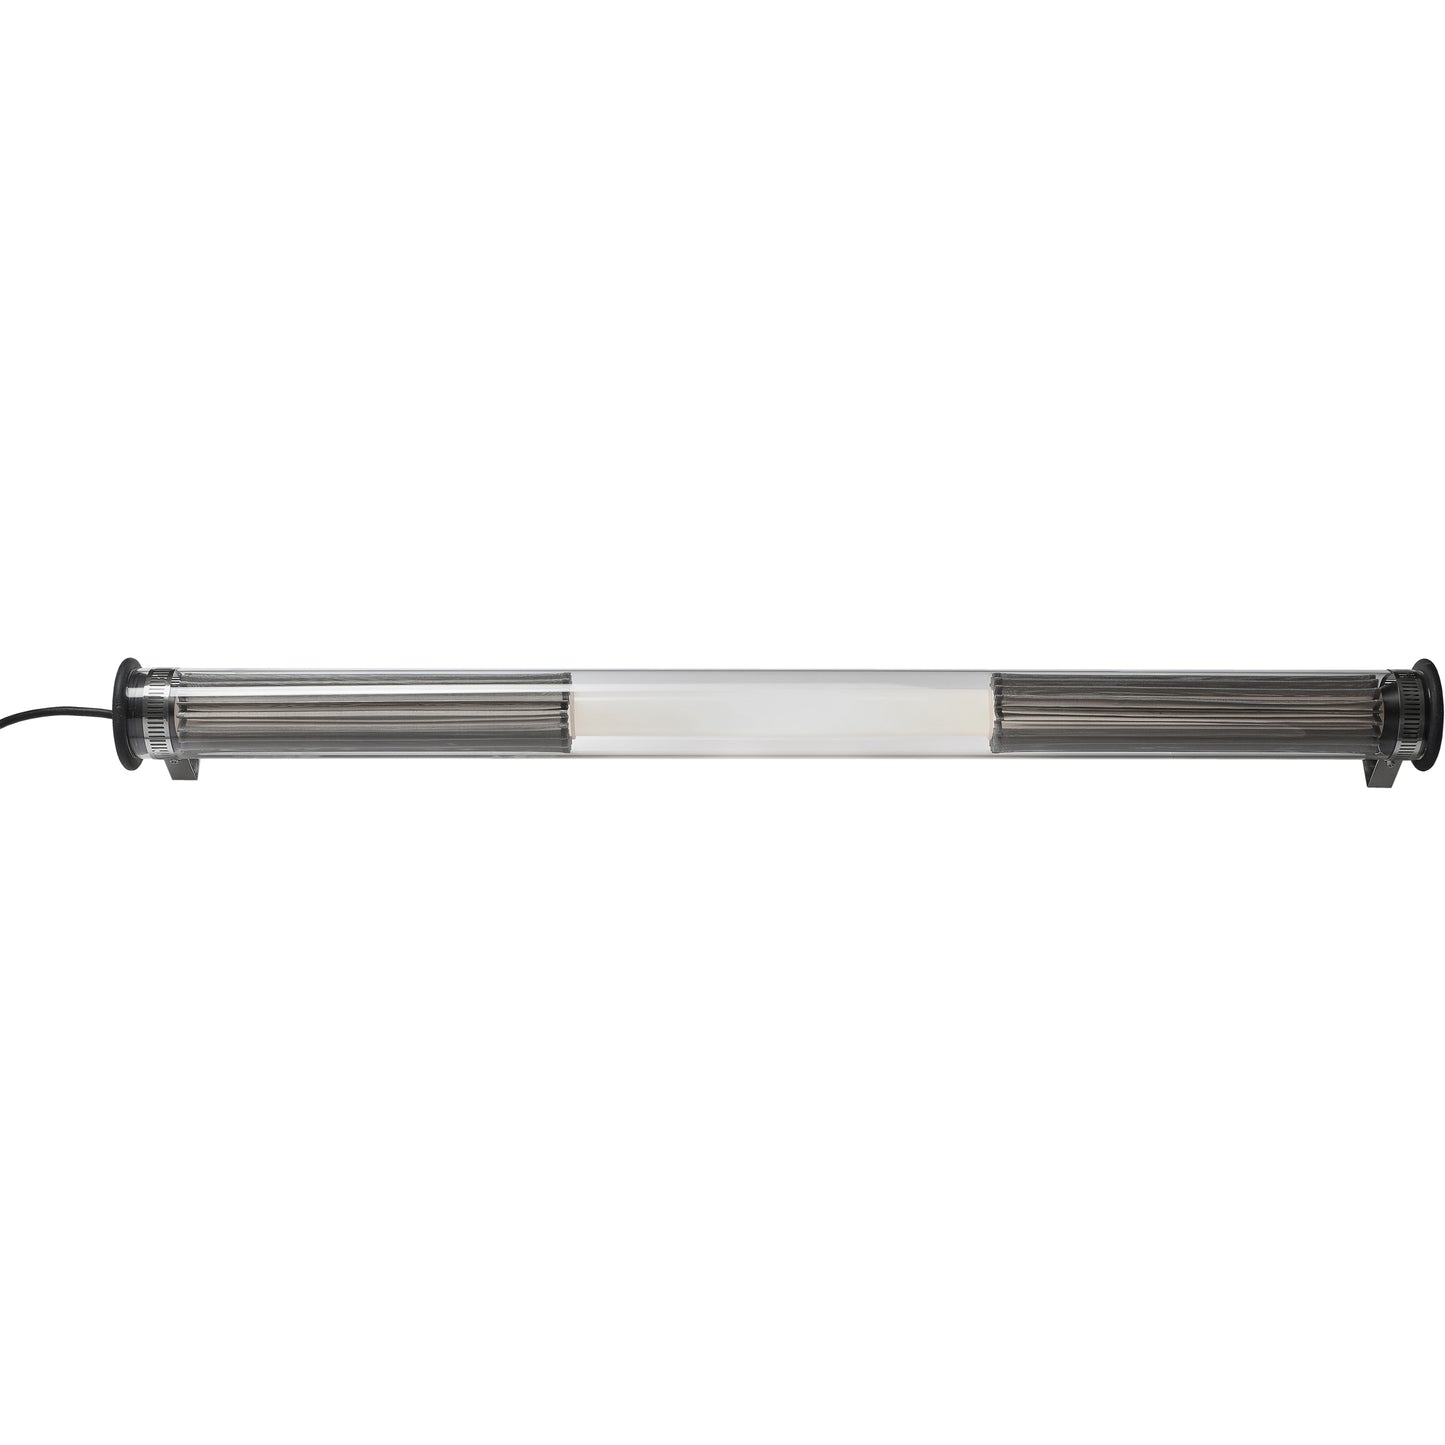 In The Tube 360 Wall Sconce - $781.00-$1,821.00